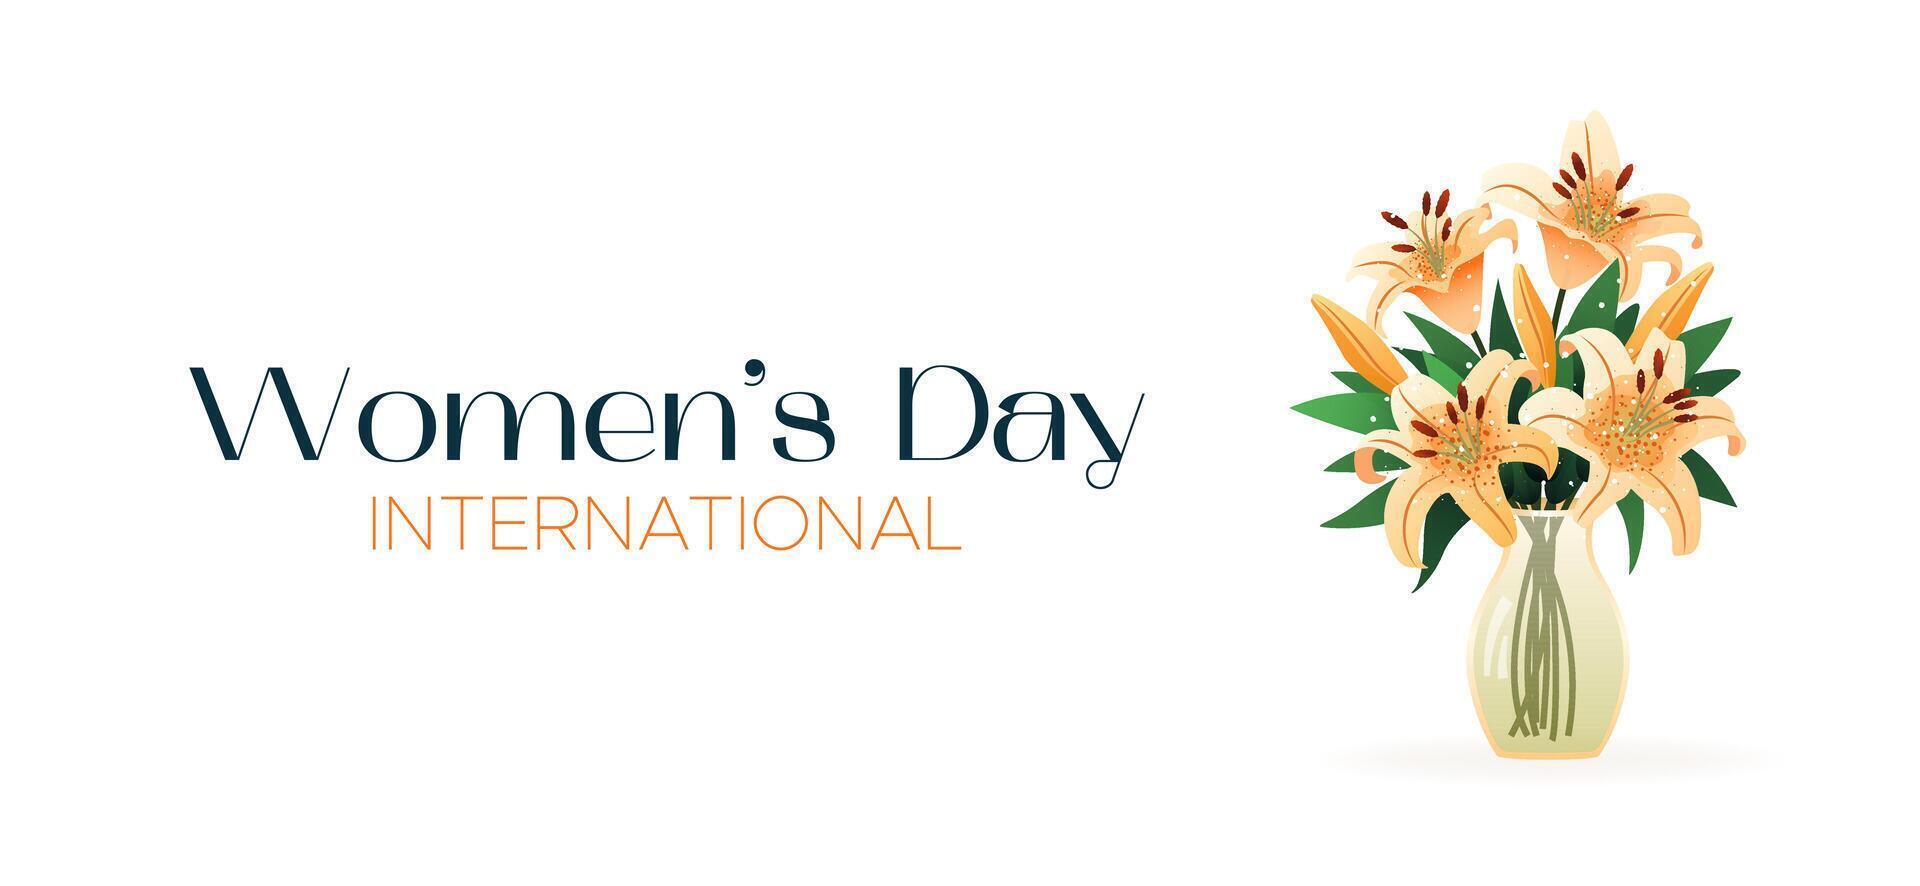 International Women's Day. 8 March. Banner, postcard with isolated bouquet of lilies in vase. Flowers on white background. Modern horizontal vector design for poster, campaign, social media post.